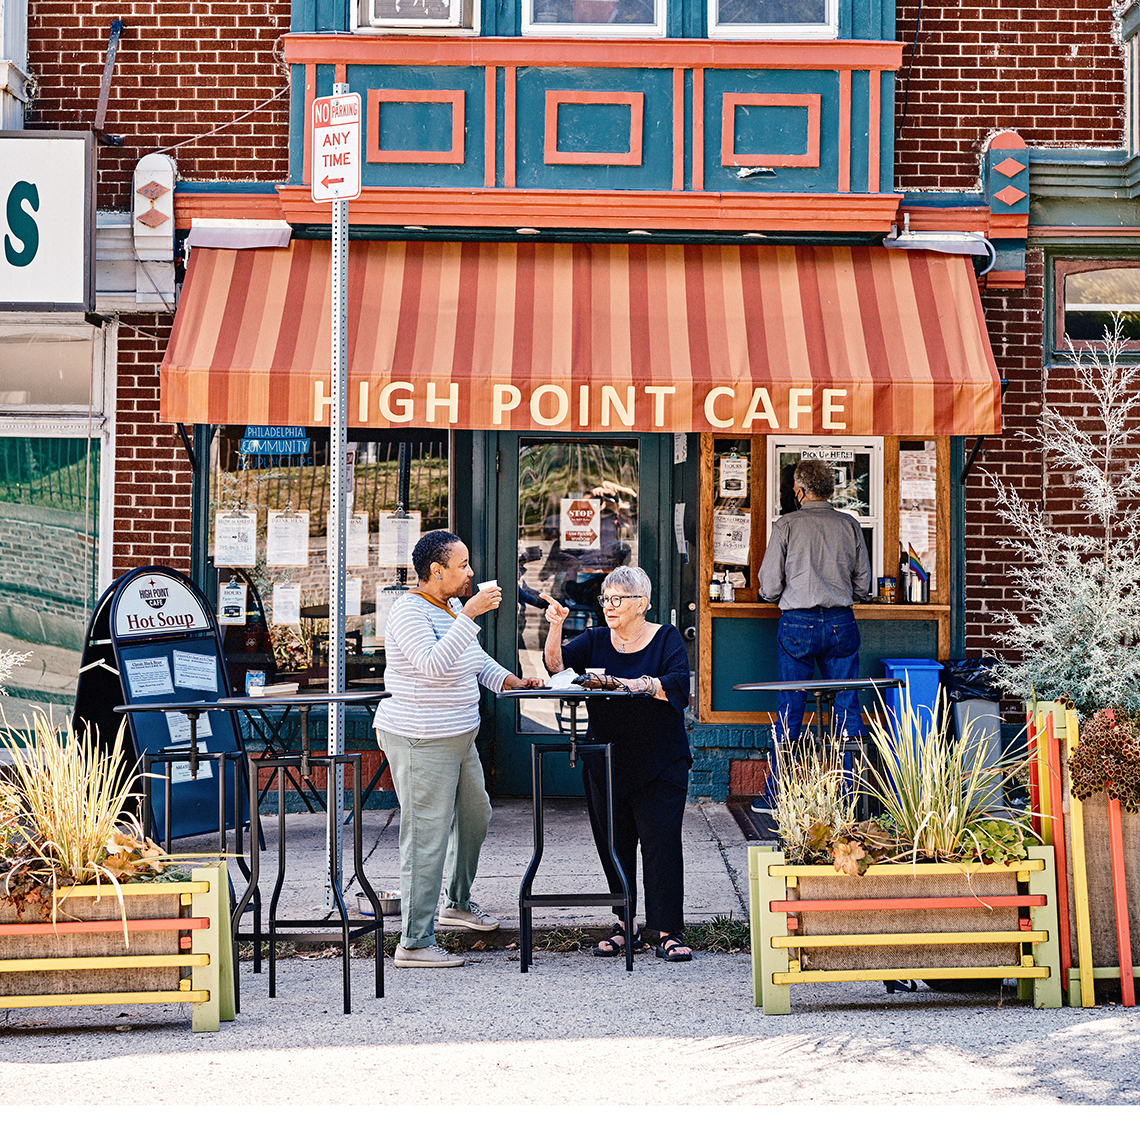 two people talk outside high point cafe in philadelphia pennsylvania